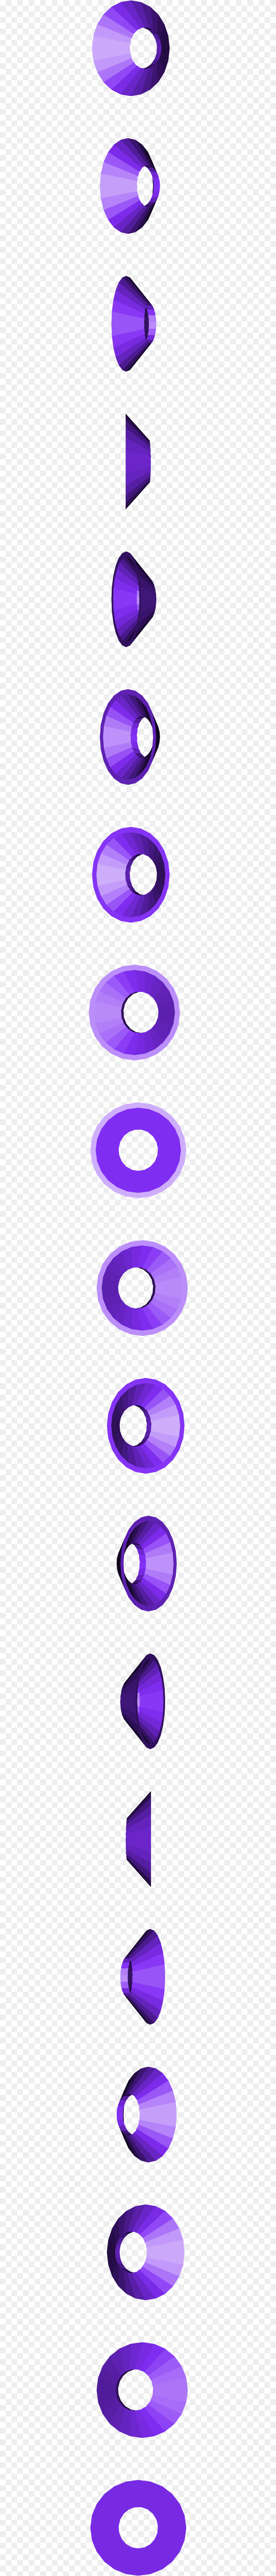 Circle, Purple, Spiral, Coil, Outdoors Png